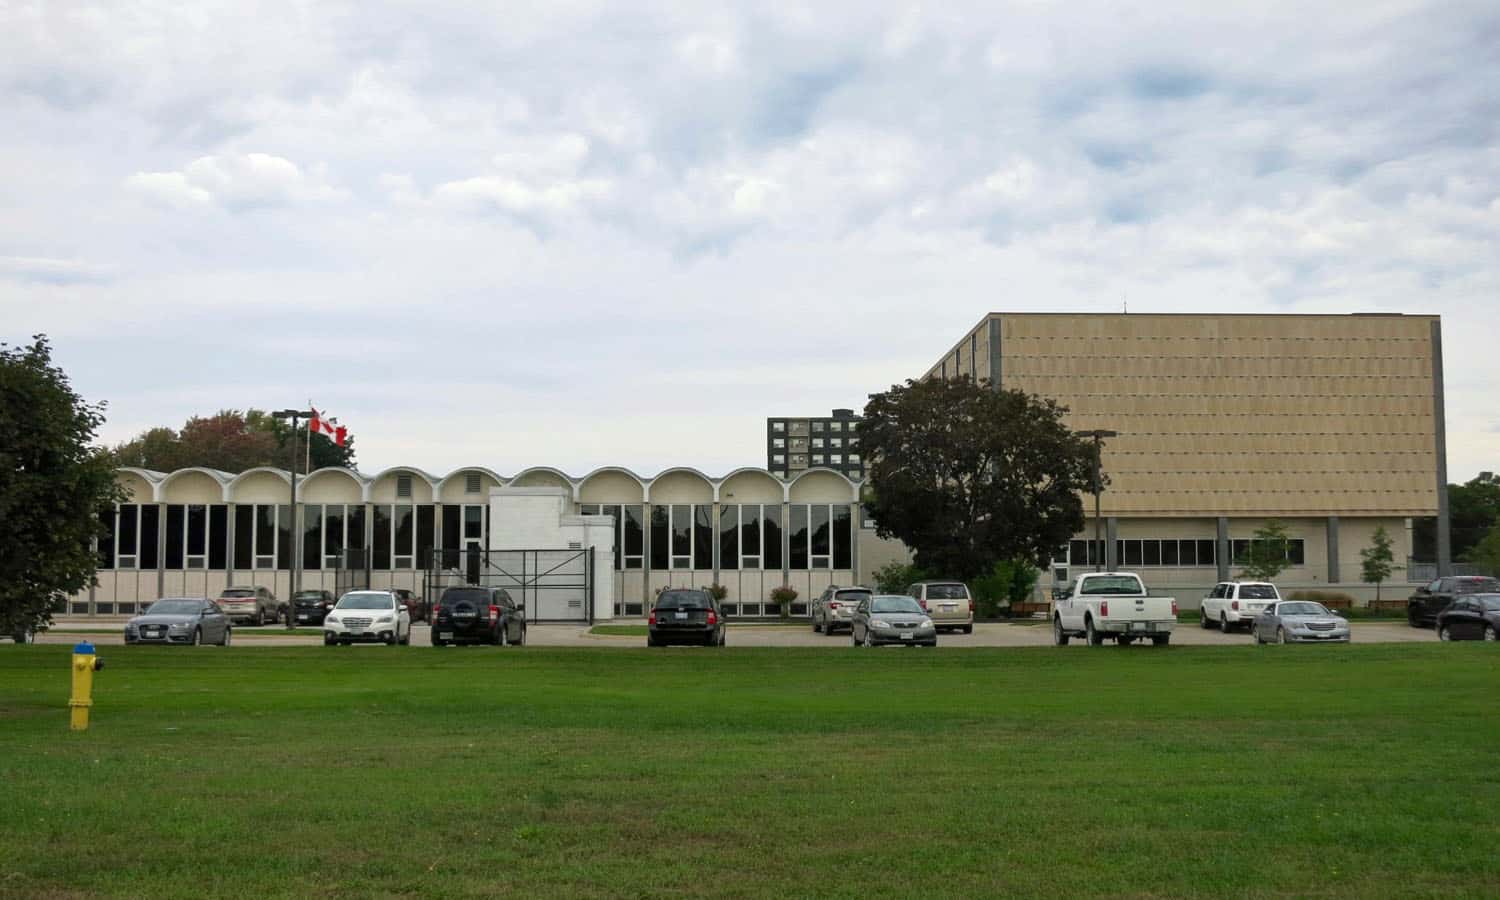 The south elevation of the complex as viewed from the approach to the Bluewater Bridge international border crossing